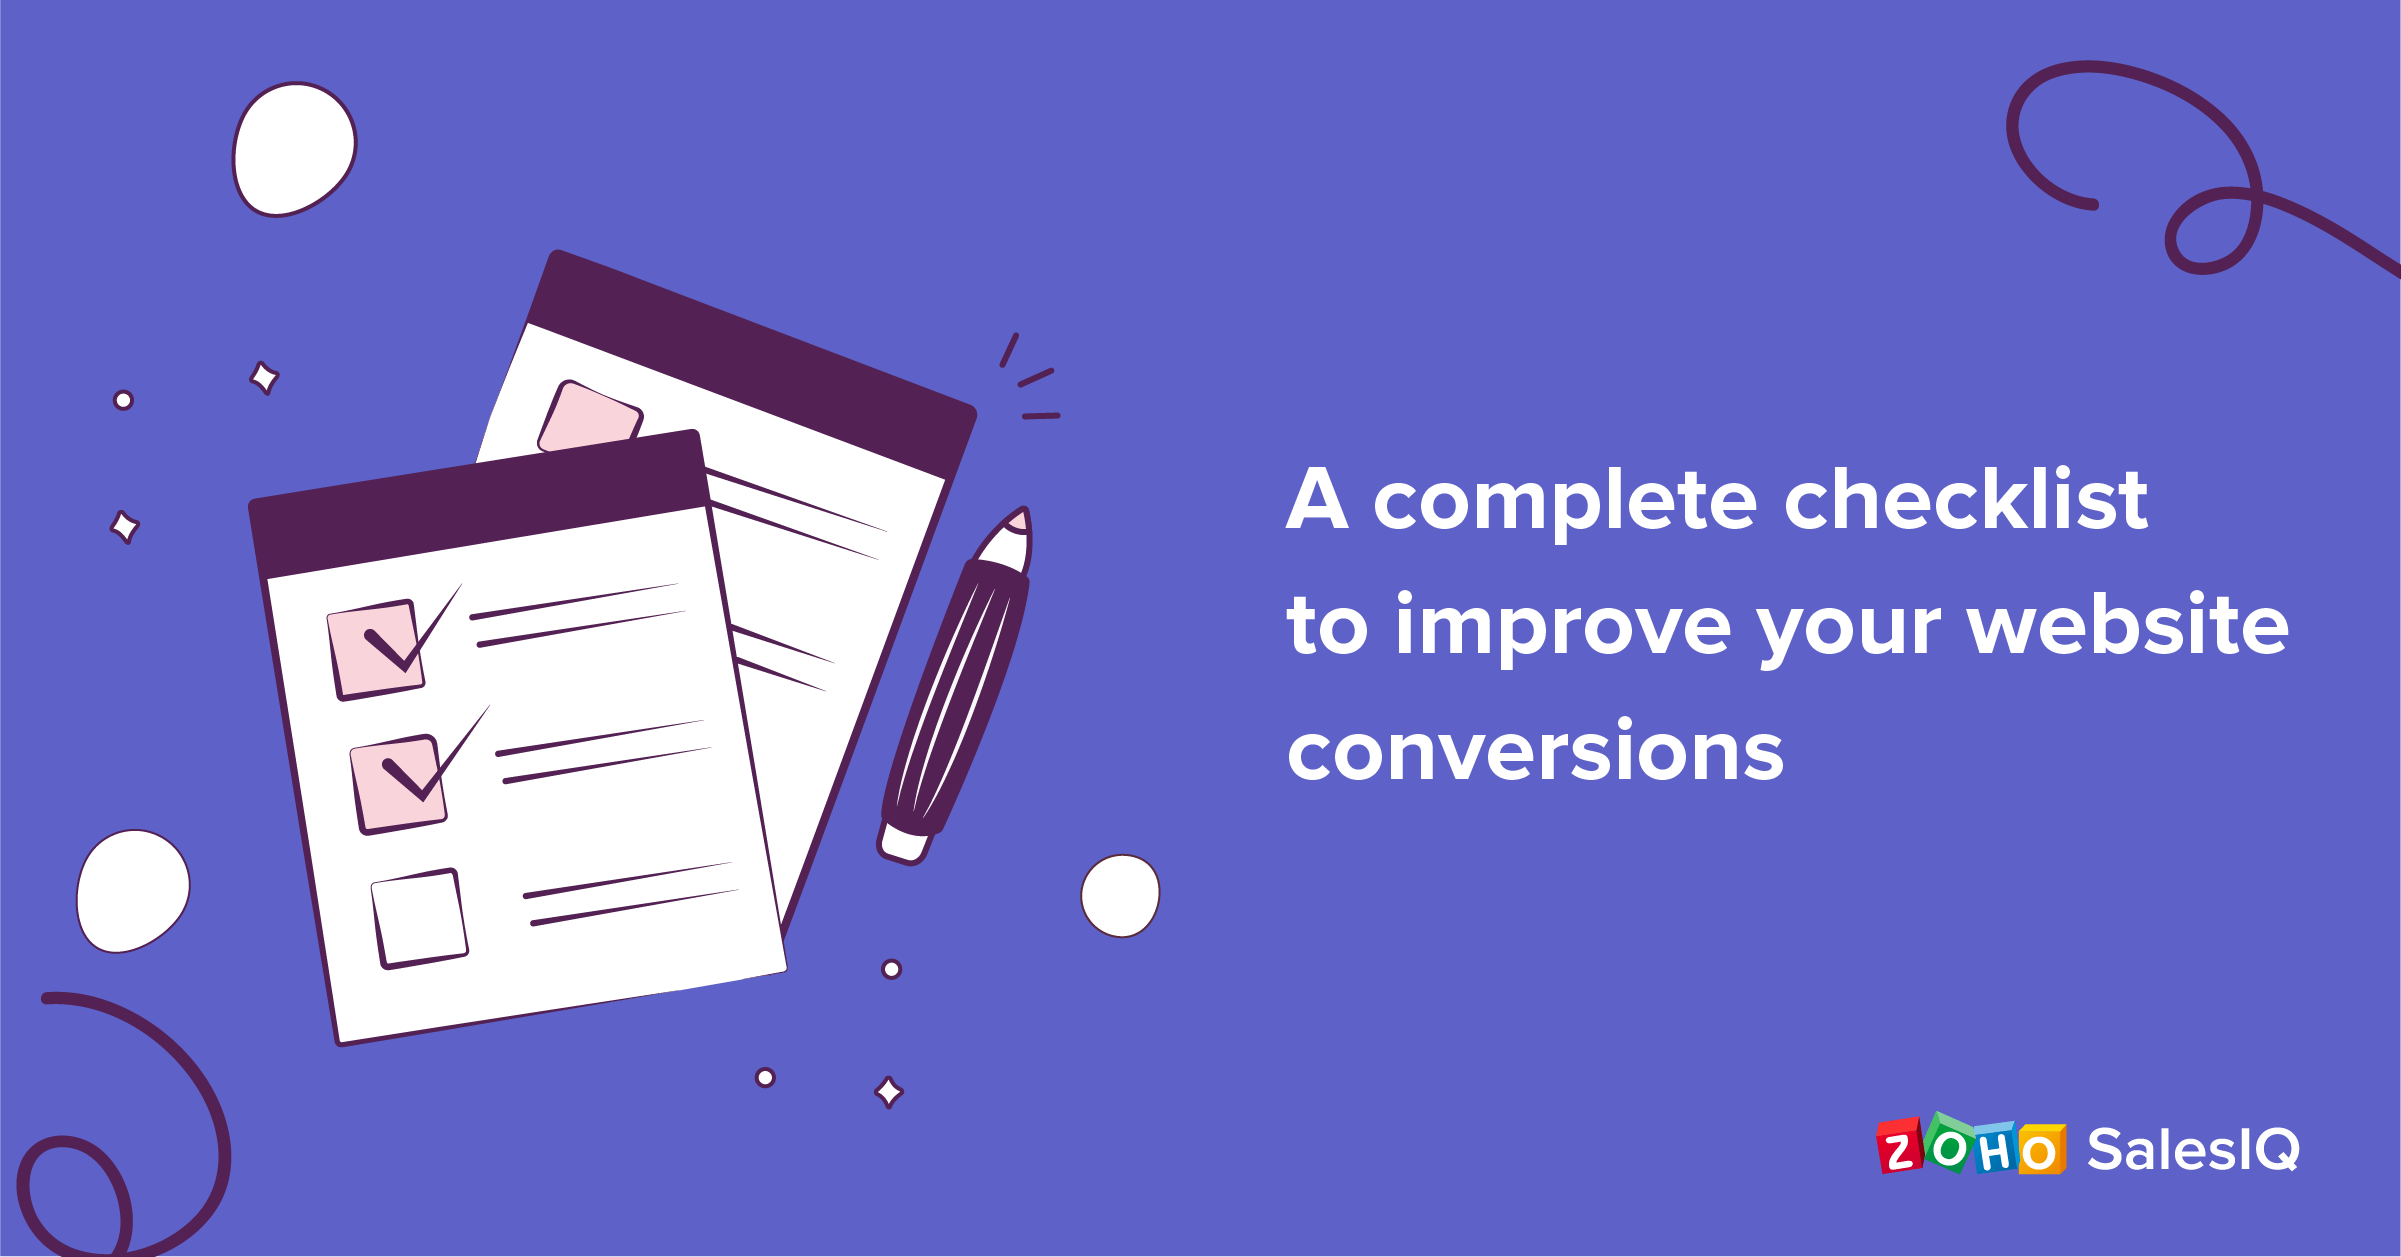 A marketer’s checklist to improve website conversions